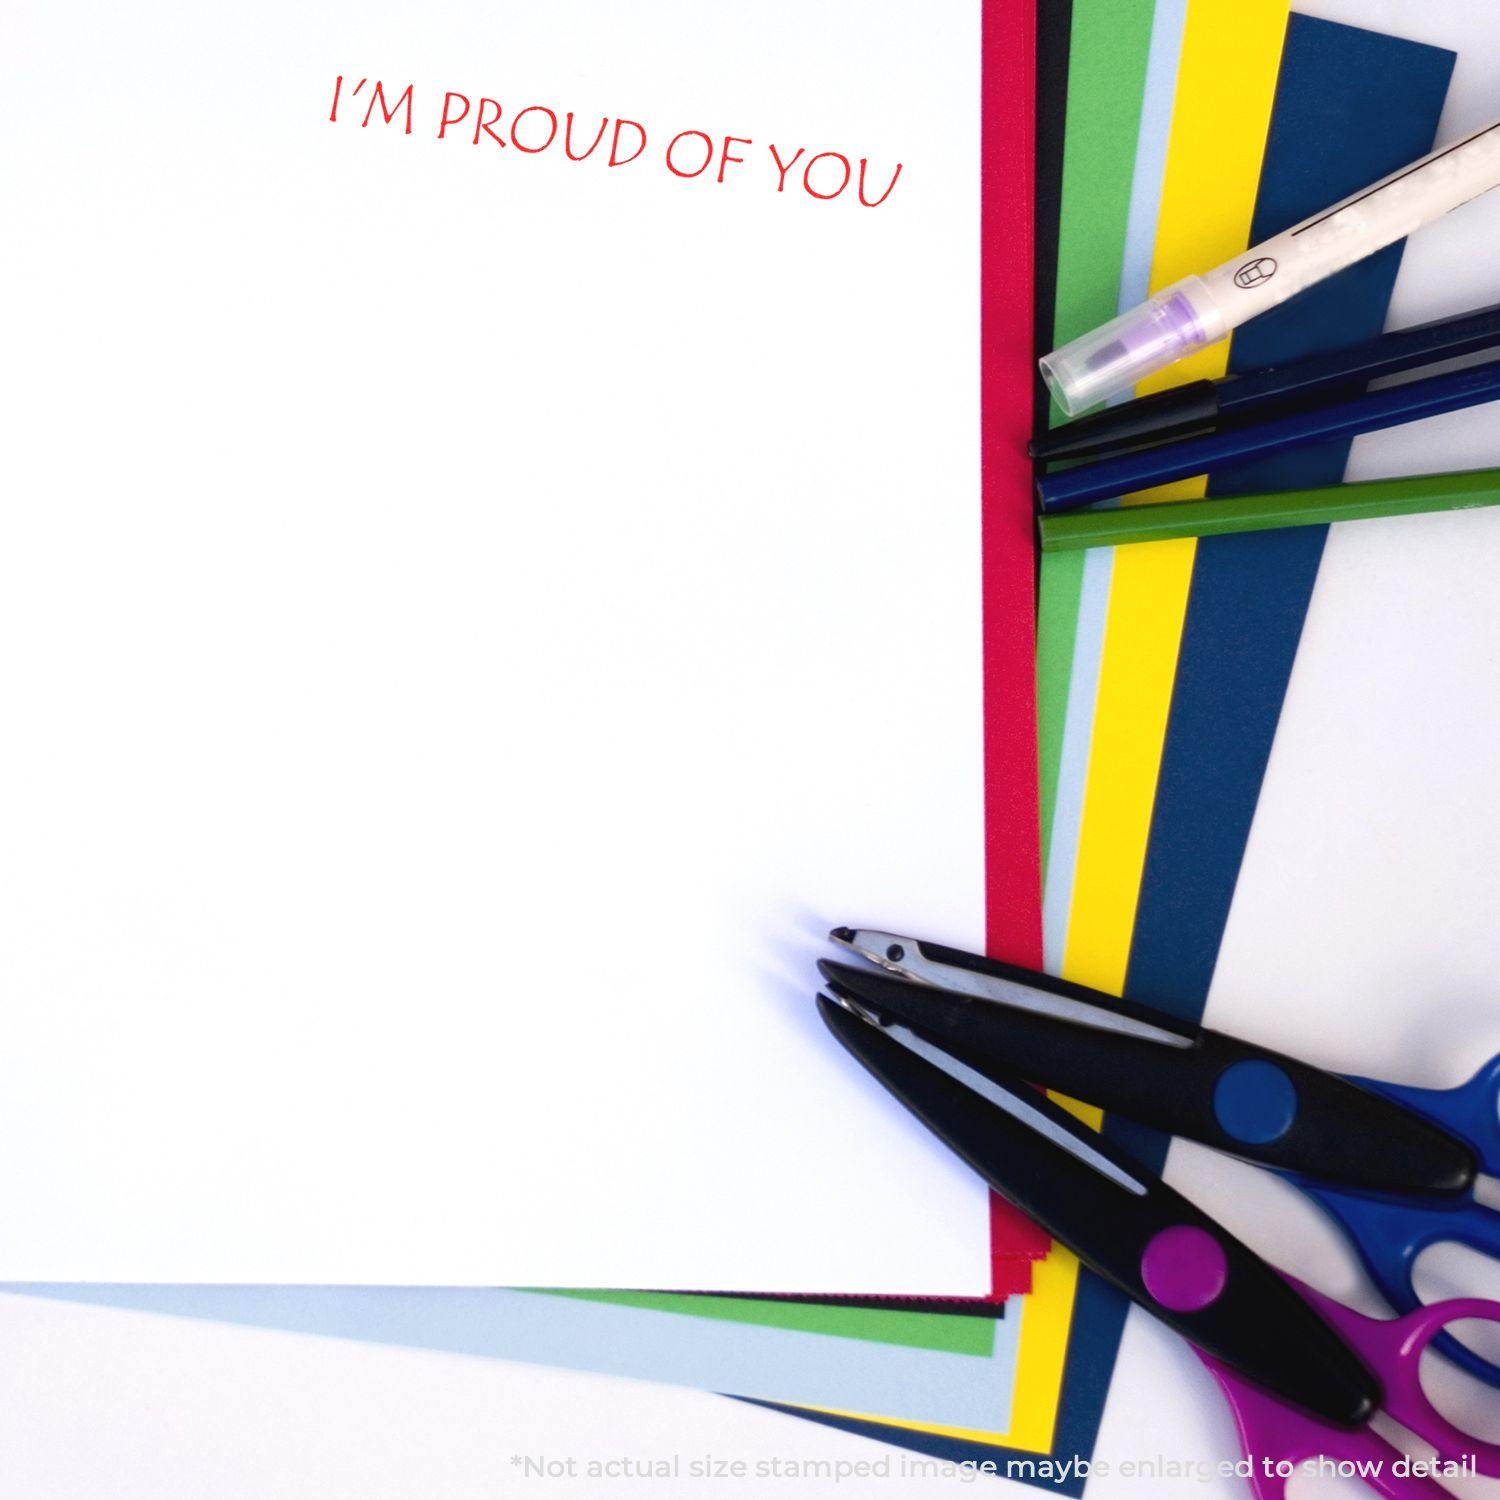 A stock office pre-inked stamp with a stamped image showing how the text "I'M PROUD OF YOU" is displayed after stamping.